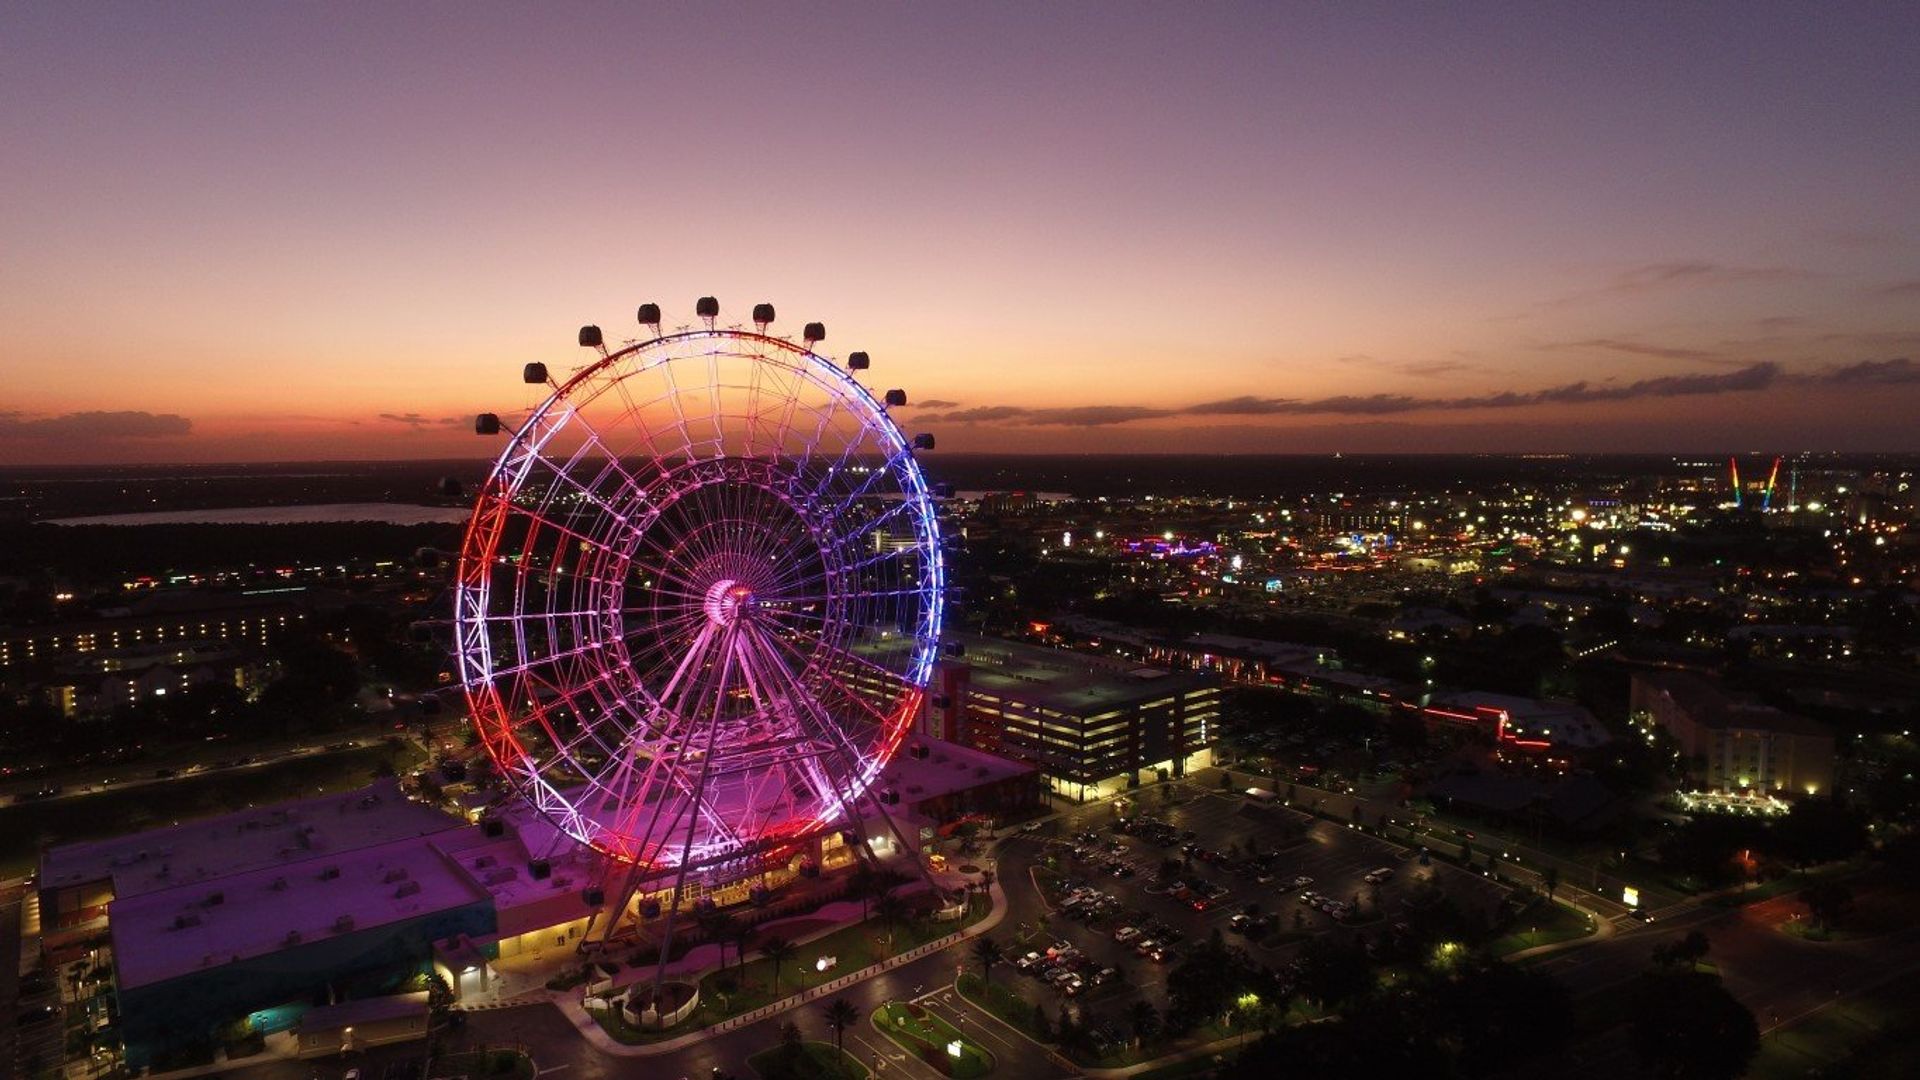 What better way to see the sights of the city than on the Orlando Eye!